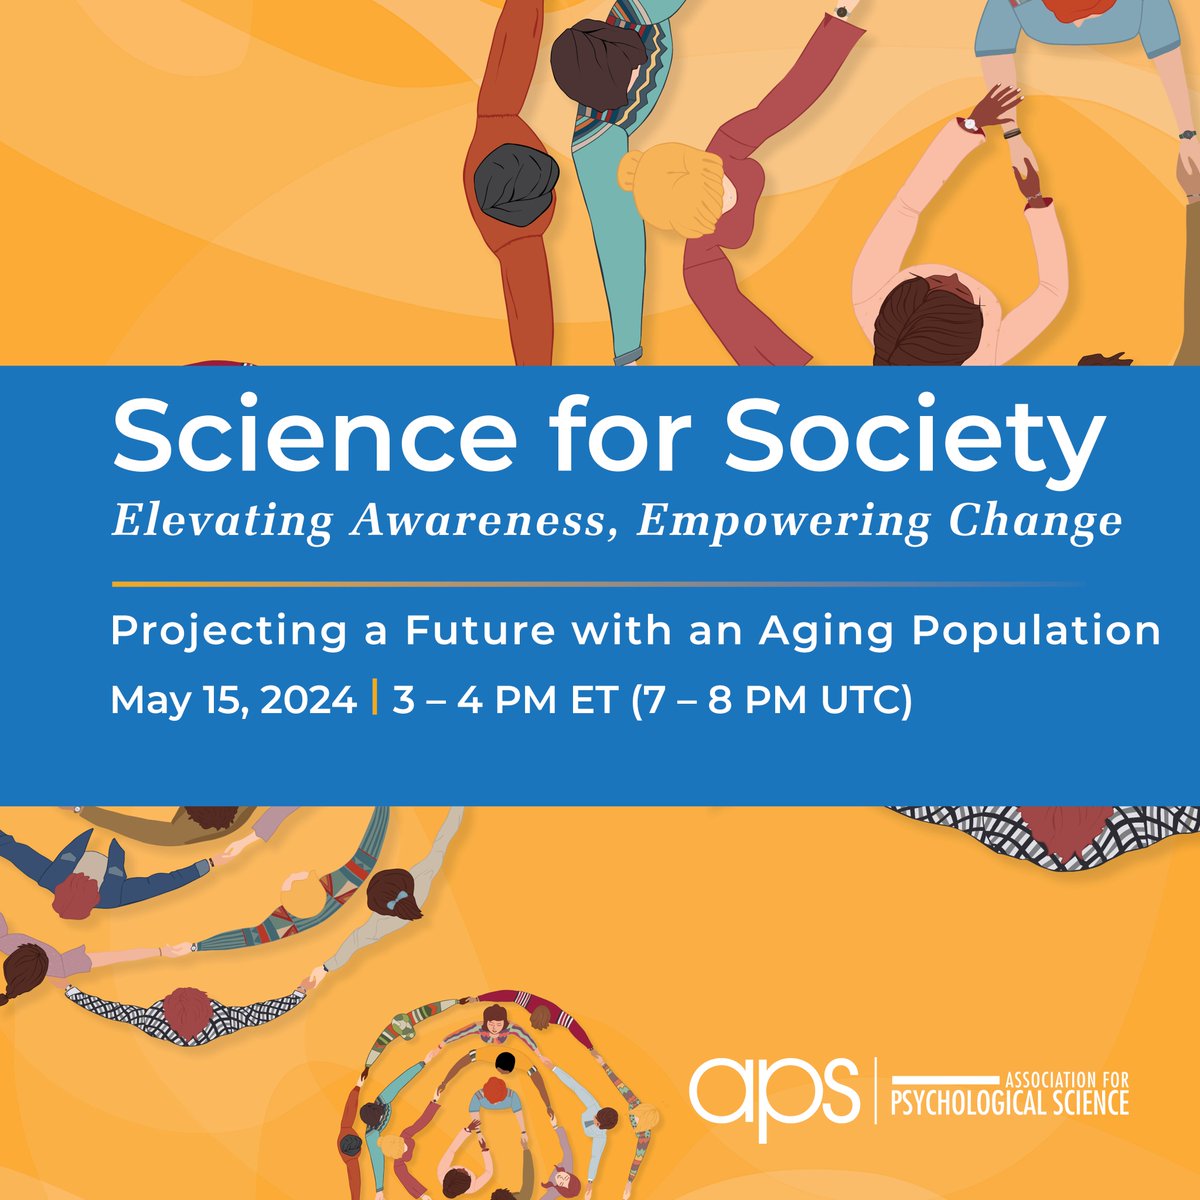 Save the dates! 🗓️ Upcoming Science for Society webinars: 
May 15: Projecting a Future with an #Aging Population
June 26: What Spurs Action on #ClimateChange?
July 17: An Interdisciplinary Perspective on Eating Disorders
bit.ly/ScienceforSoci…